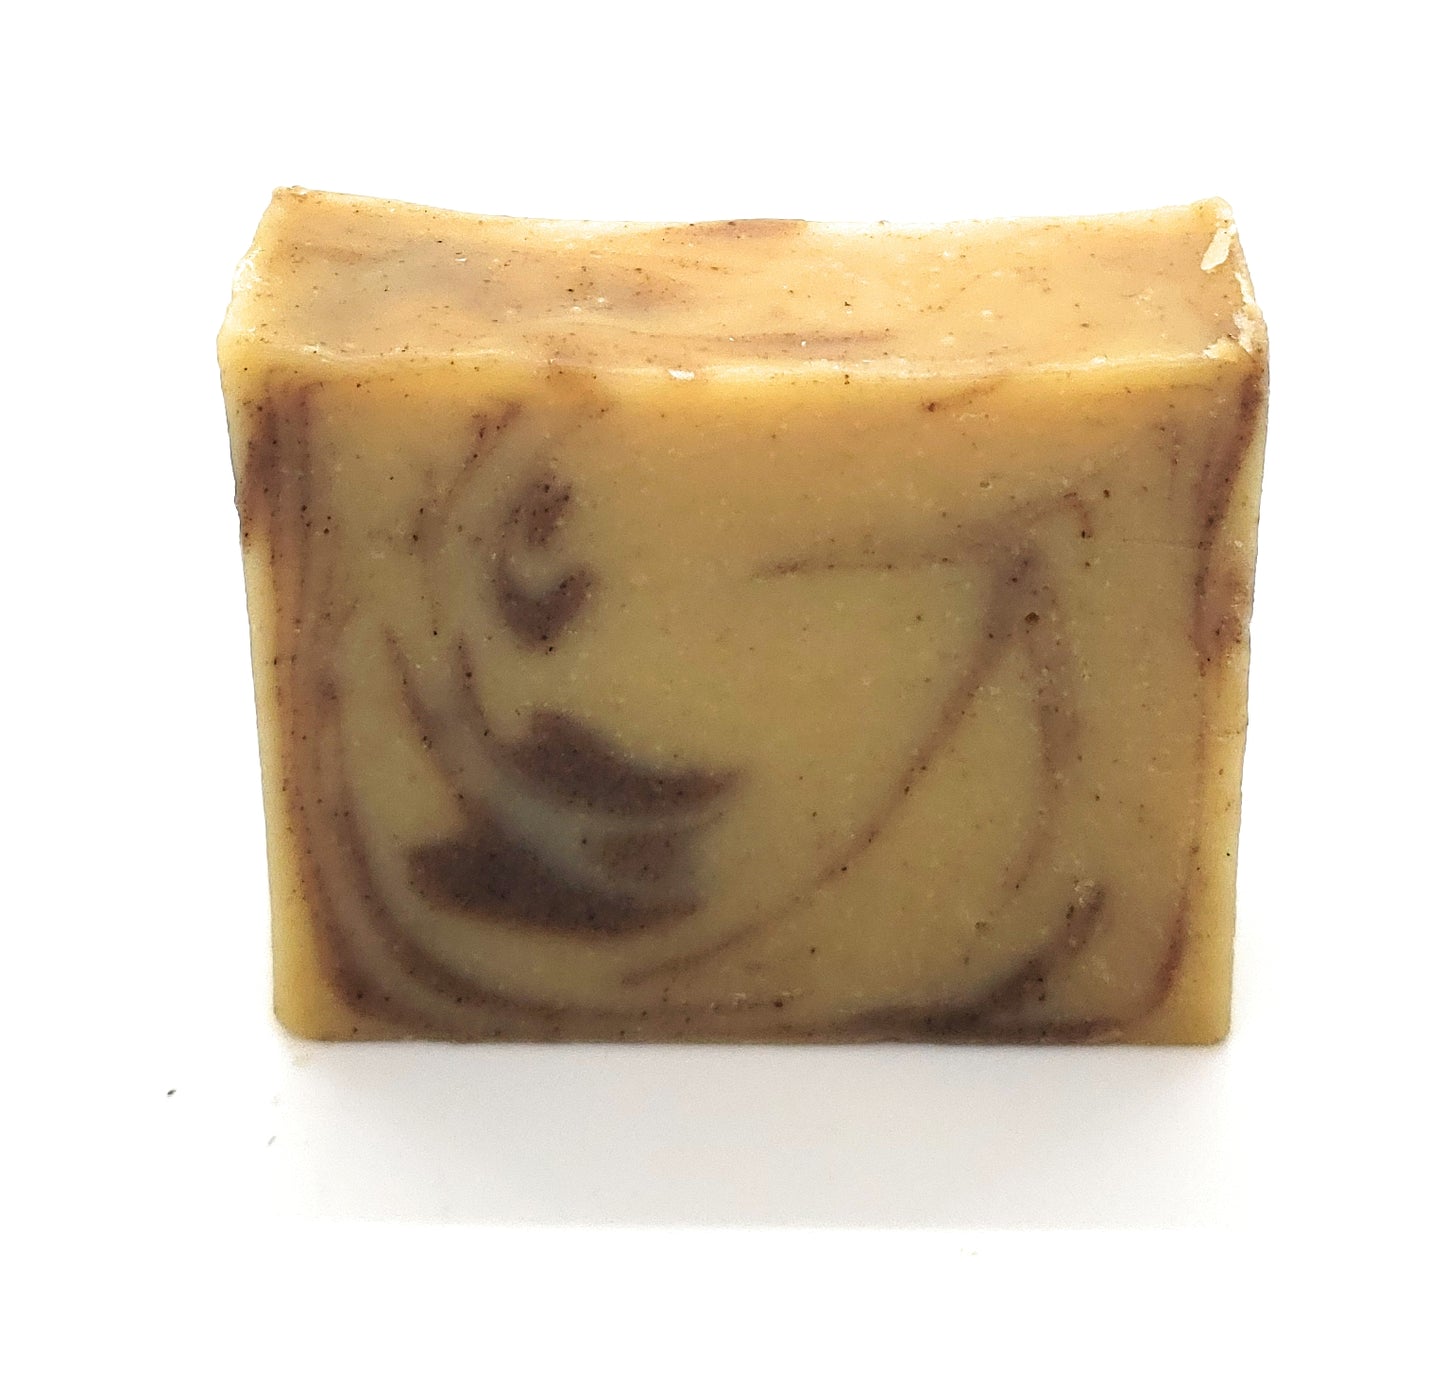 Goat's Milk Soap, Woodland Spice with turmeric